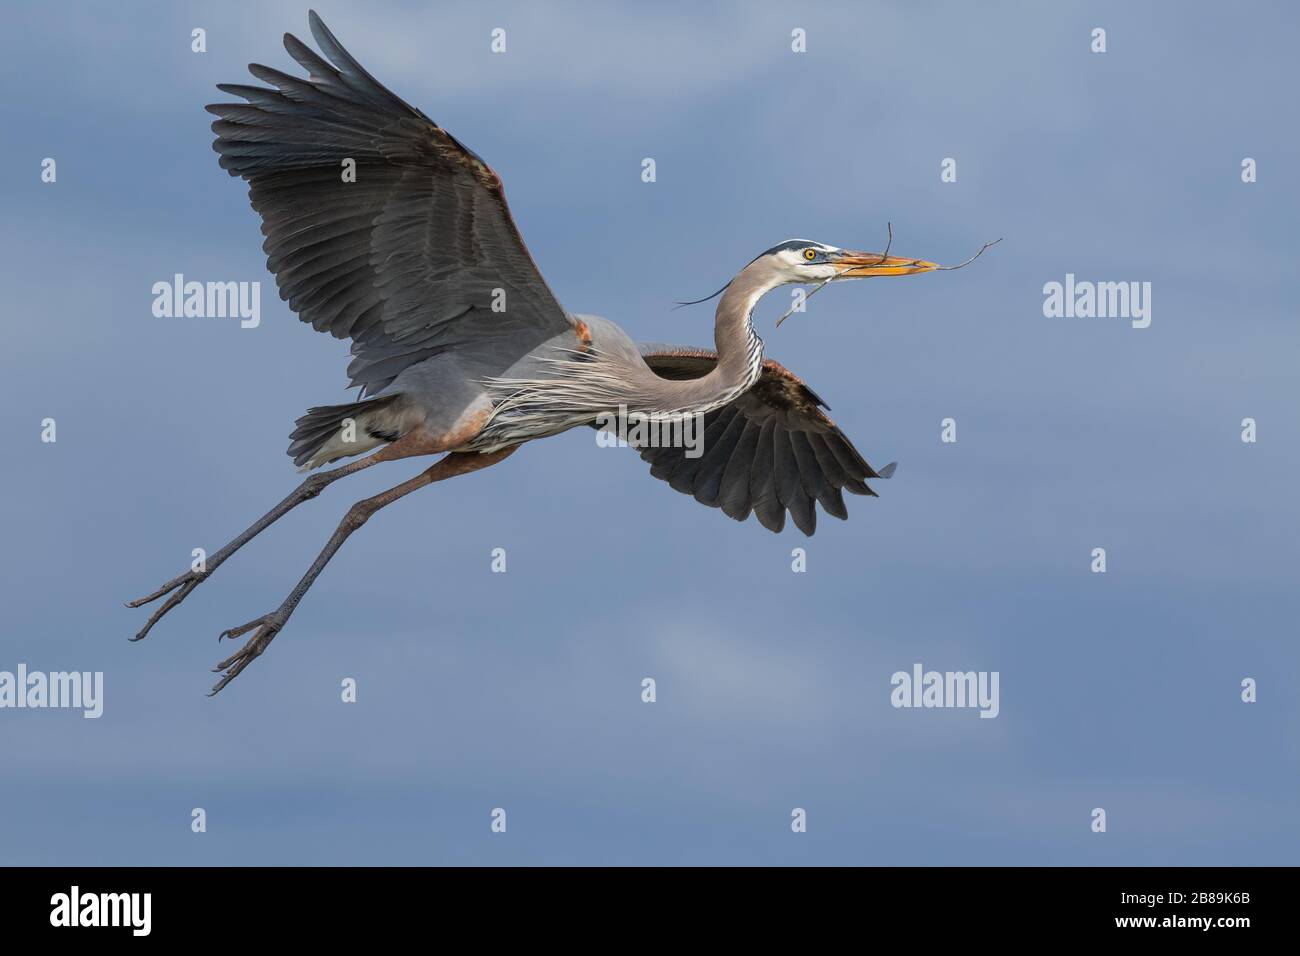 A Great Blue Heron Flying Stock Photo